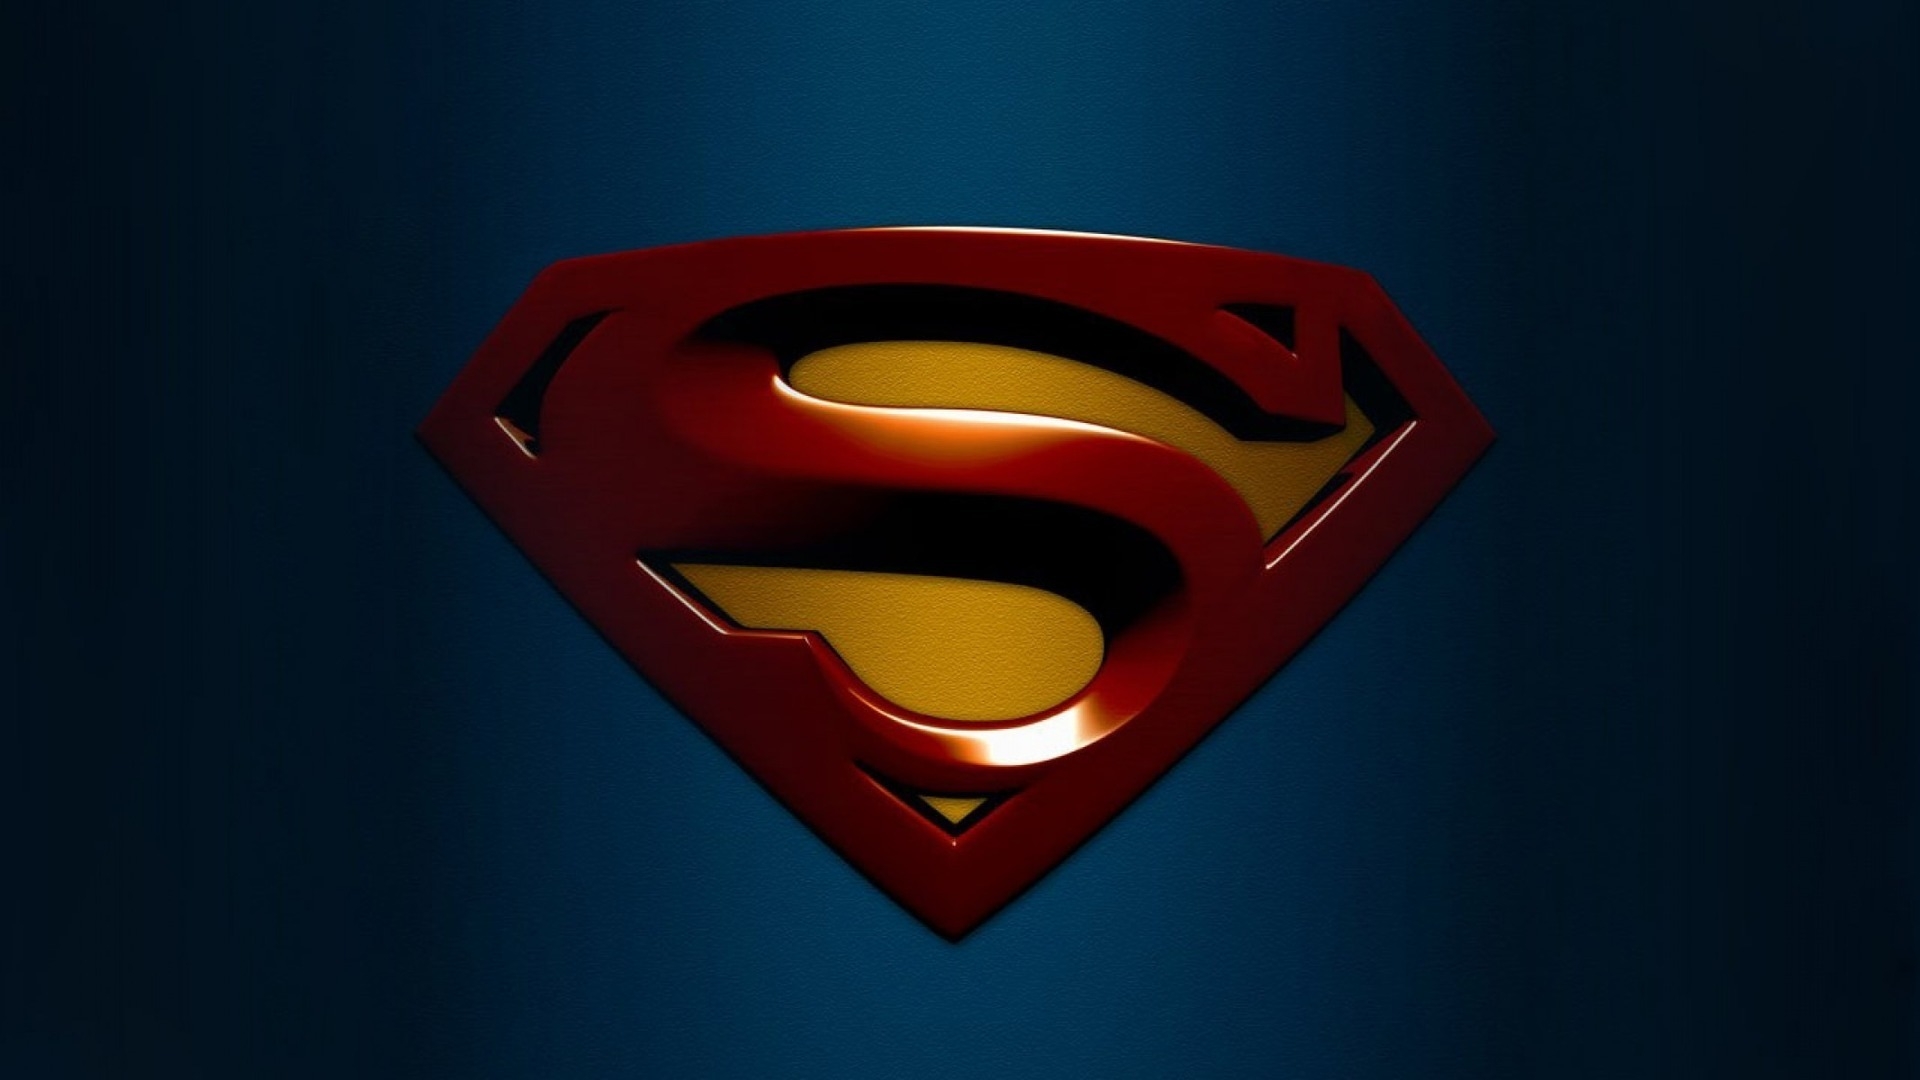 Just Superman for 1920 x 1080 HDTV 1080p resolution